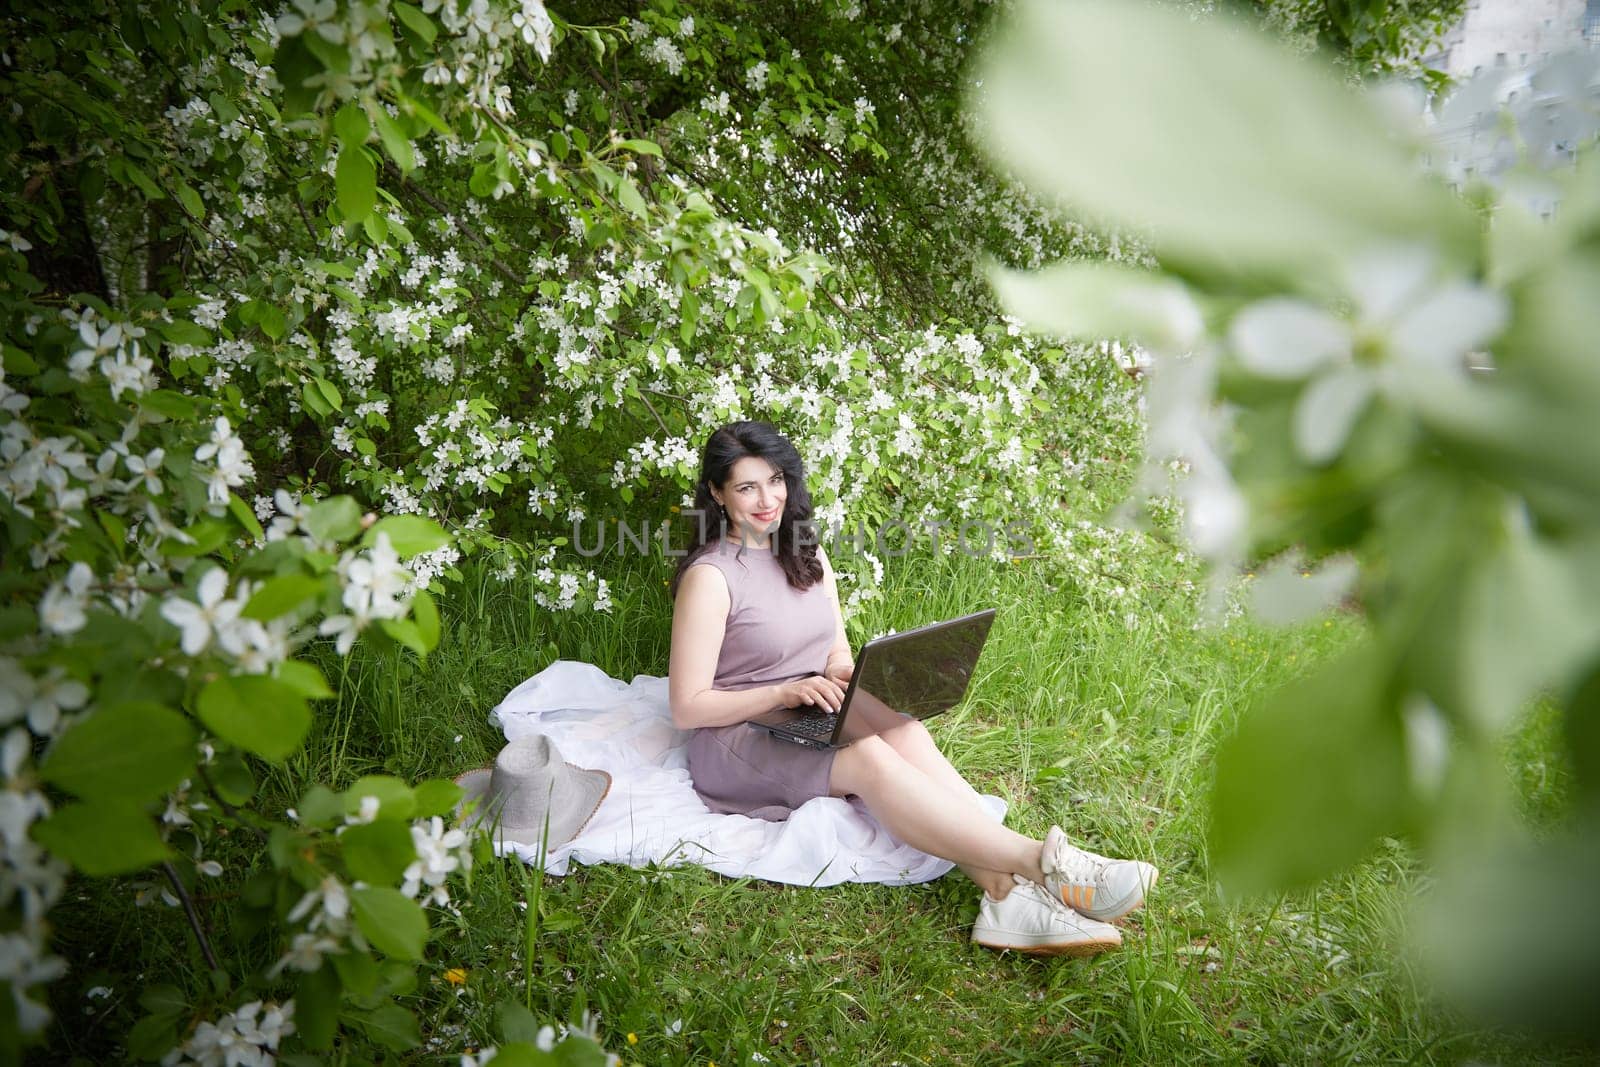 Girl engages with laptop amidst lush greenery. Freelancer Woman Working on Laptop Outdoors in a Blooming Garden